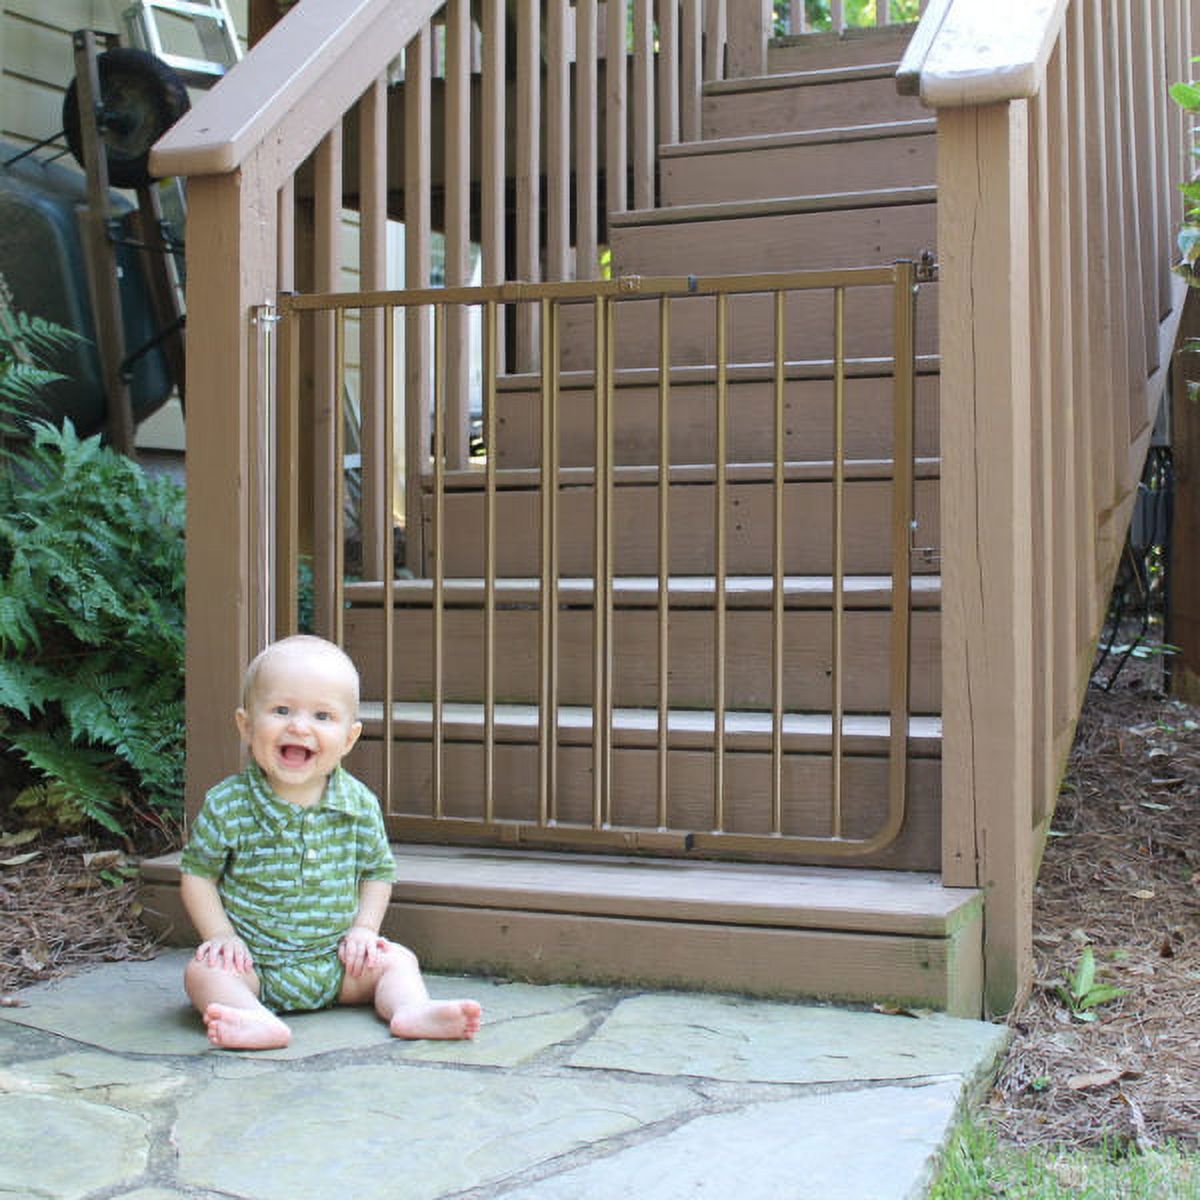 Cardinal Gates Stairway Special Outdoor Child Safety Gate - image 2 of 5